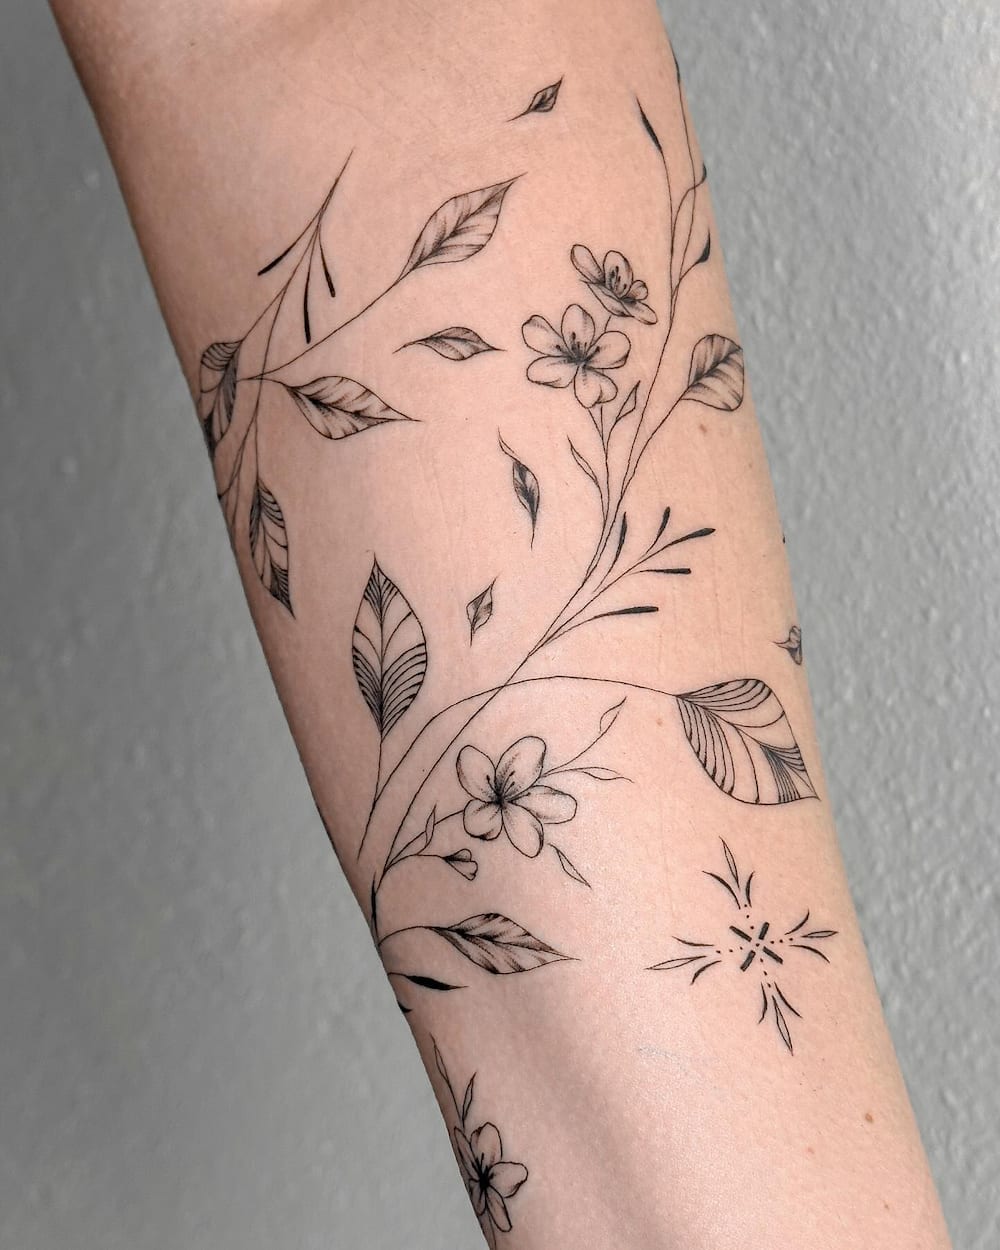 Monochrome vine tattoo with floral and leaf motifs on the arm.